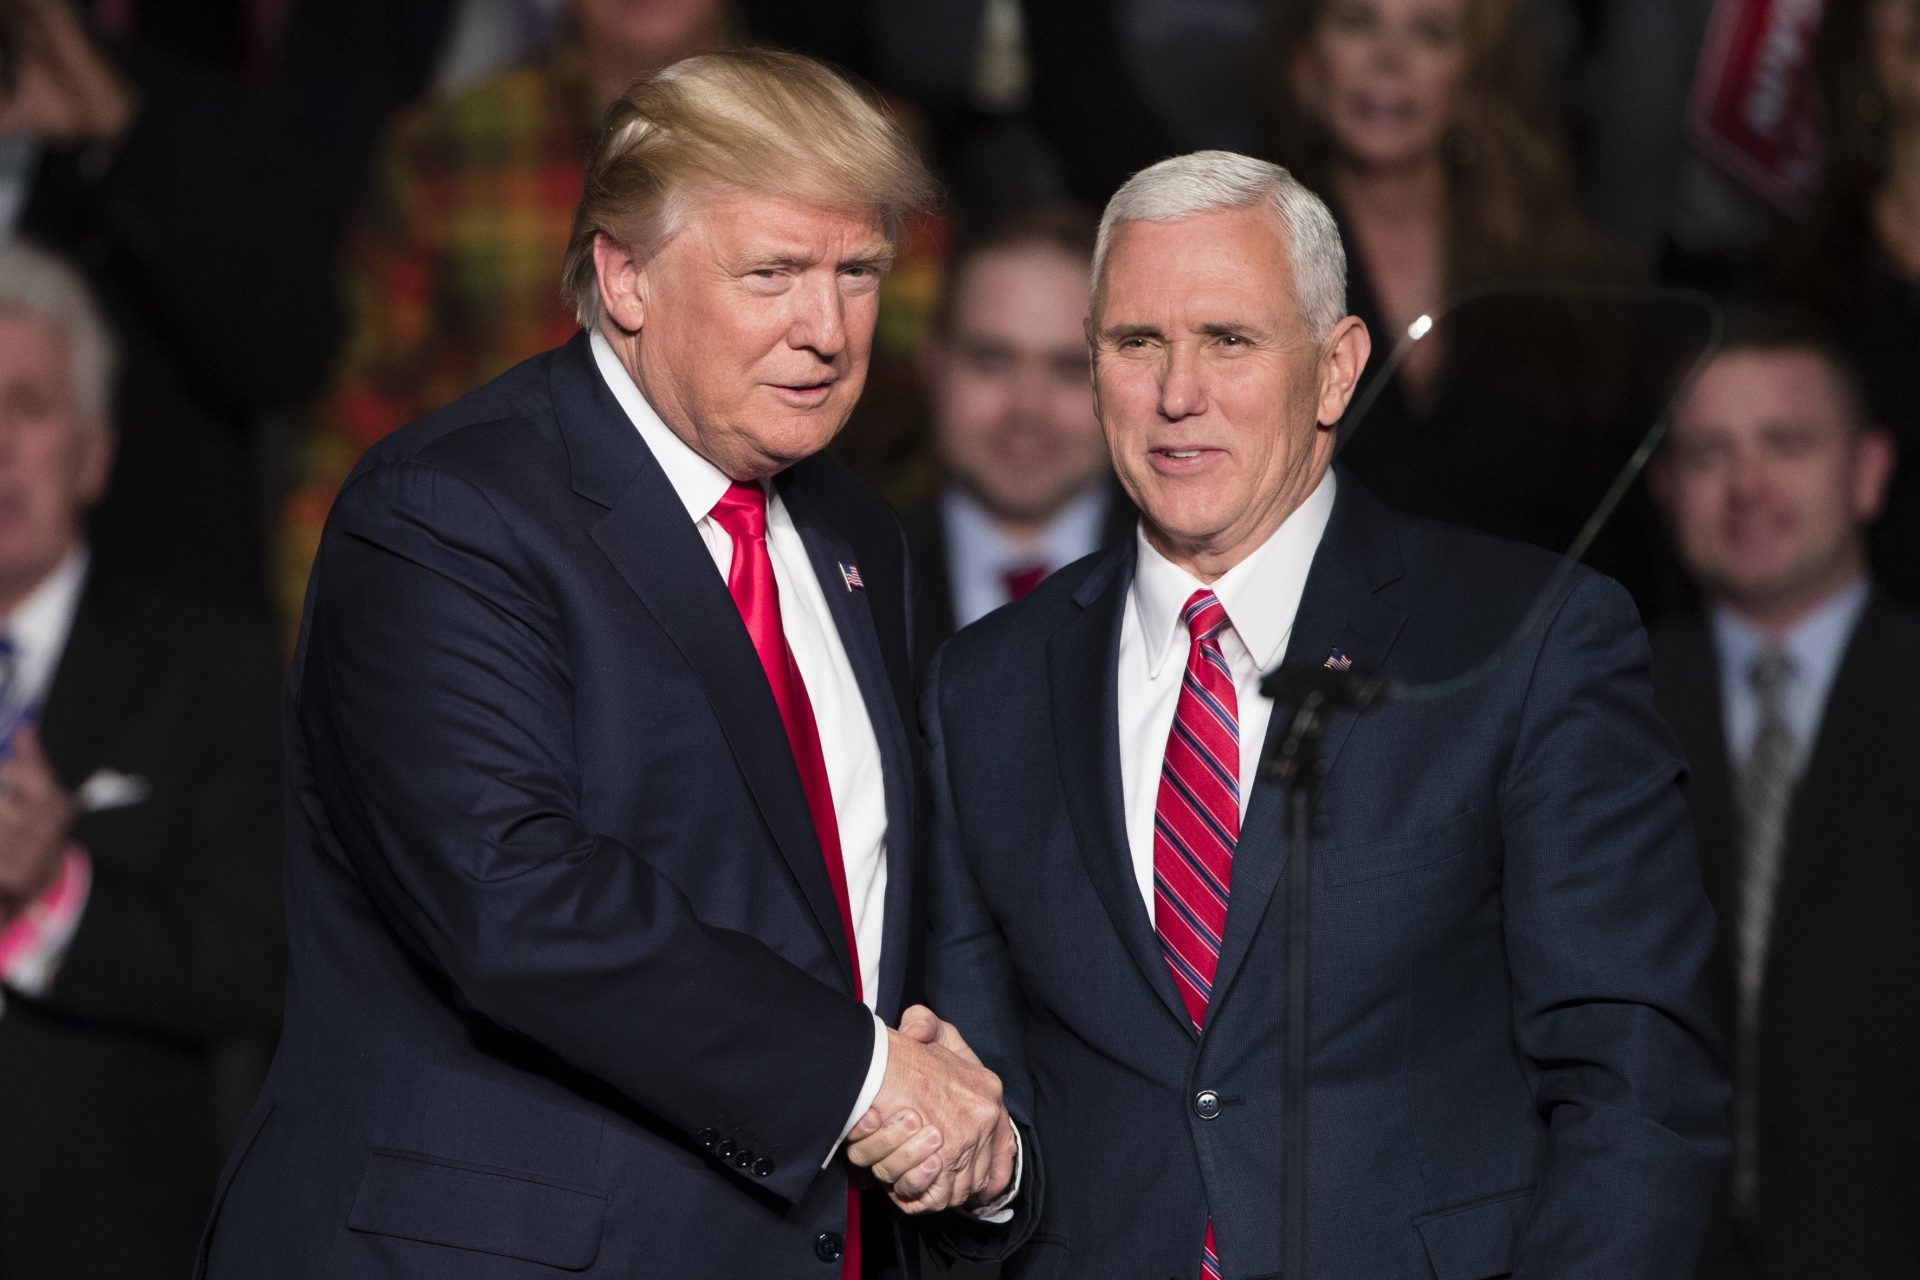 FILE PHOTO: President-elect Donald Trump, left, shakes hands with Vice President-elect Mike Pence during a rally at the Giant Center, Thursday, Dec. 15, 2016, in Hershey.